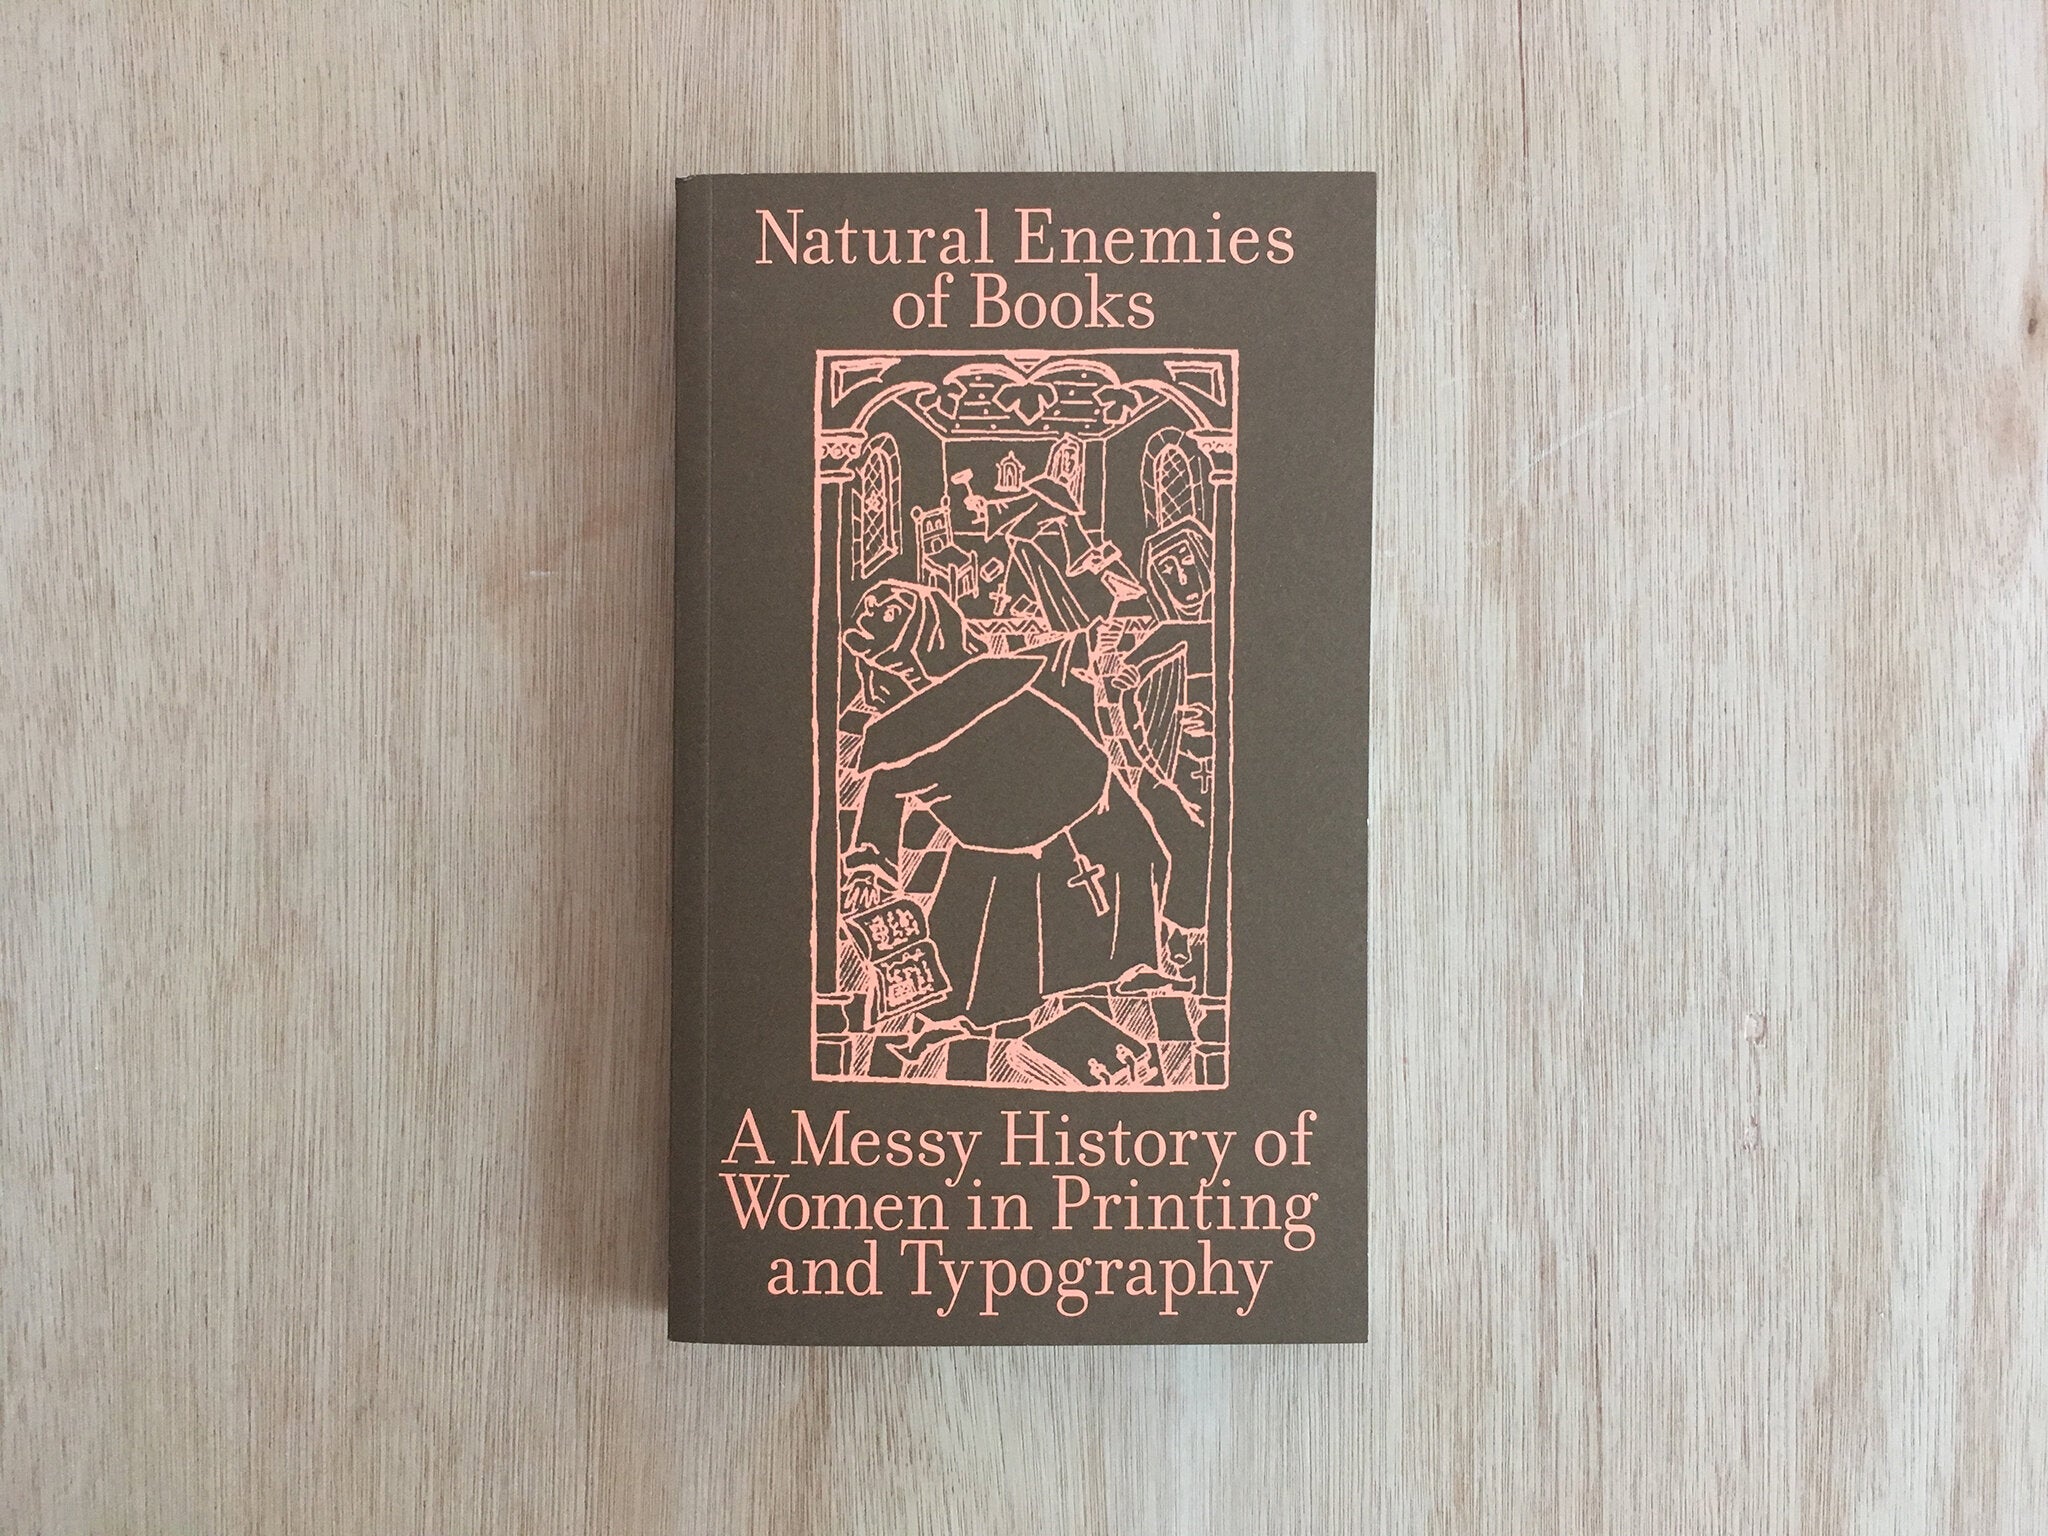 THE NATURAL ENEMIES OF BOOKS: A MESSY HISTORY OF WOMEN IN PRINTING AND TYPOGRAPHY edited by MMS